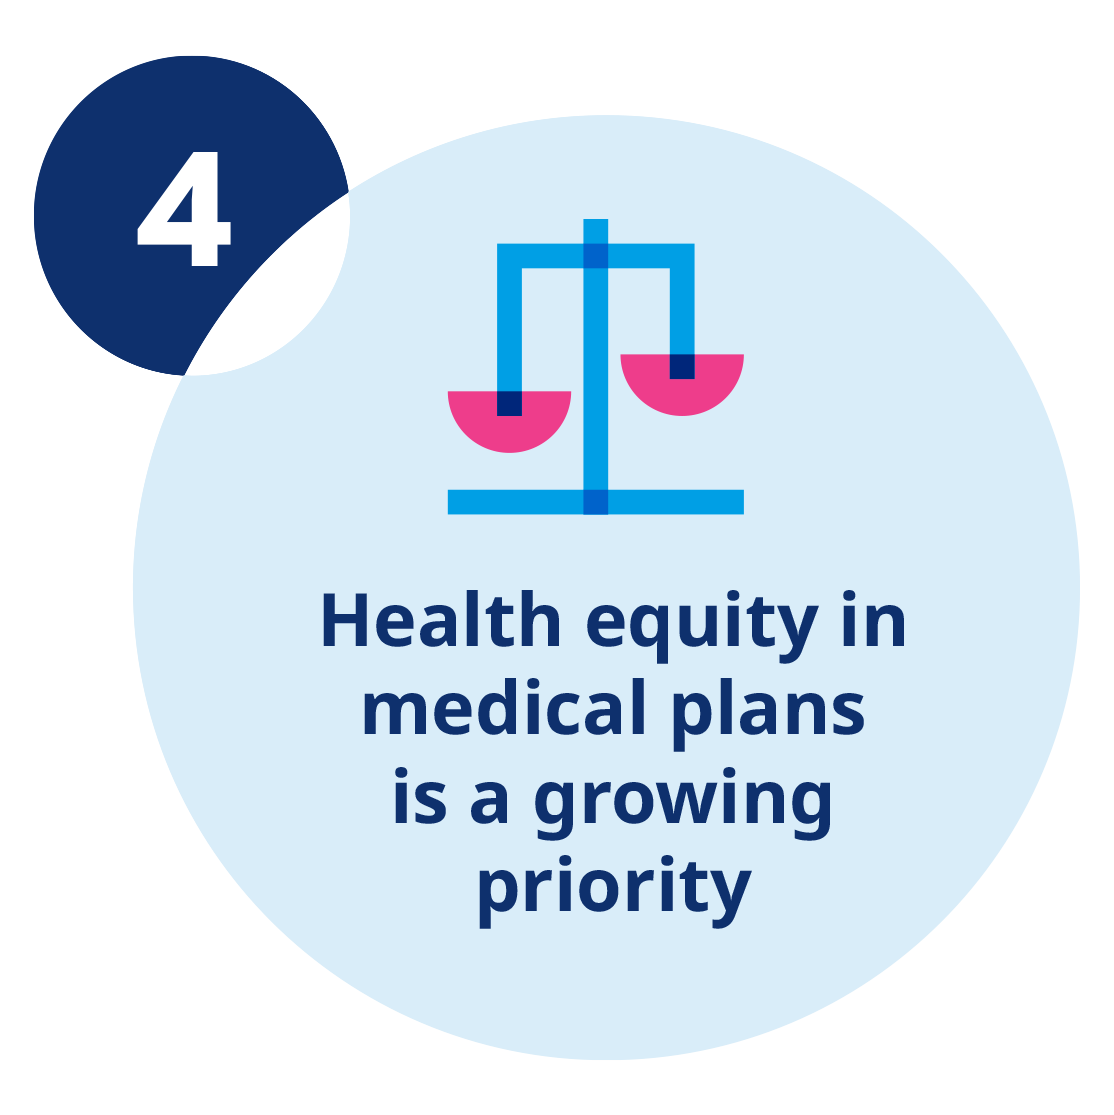 4. Health equity in medical plans is a growing priority